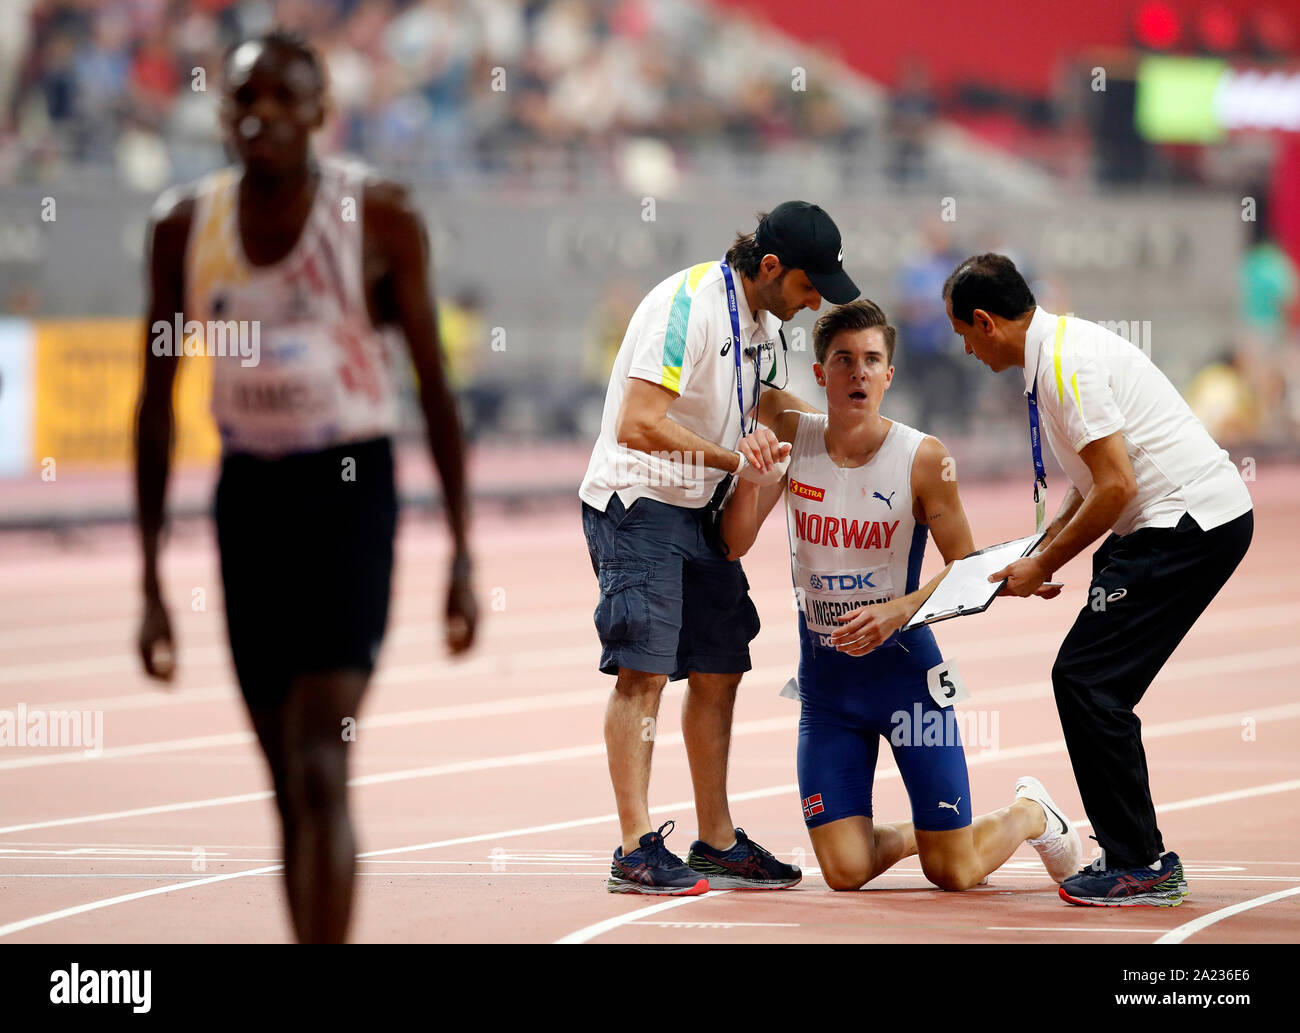 Jakob Ingebrigtsen High Resolution Stock Photography And Images Alamy